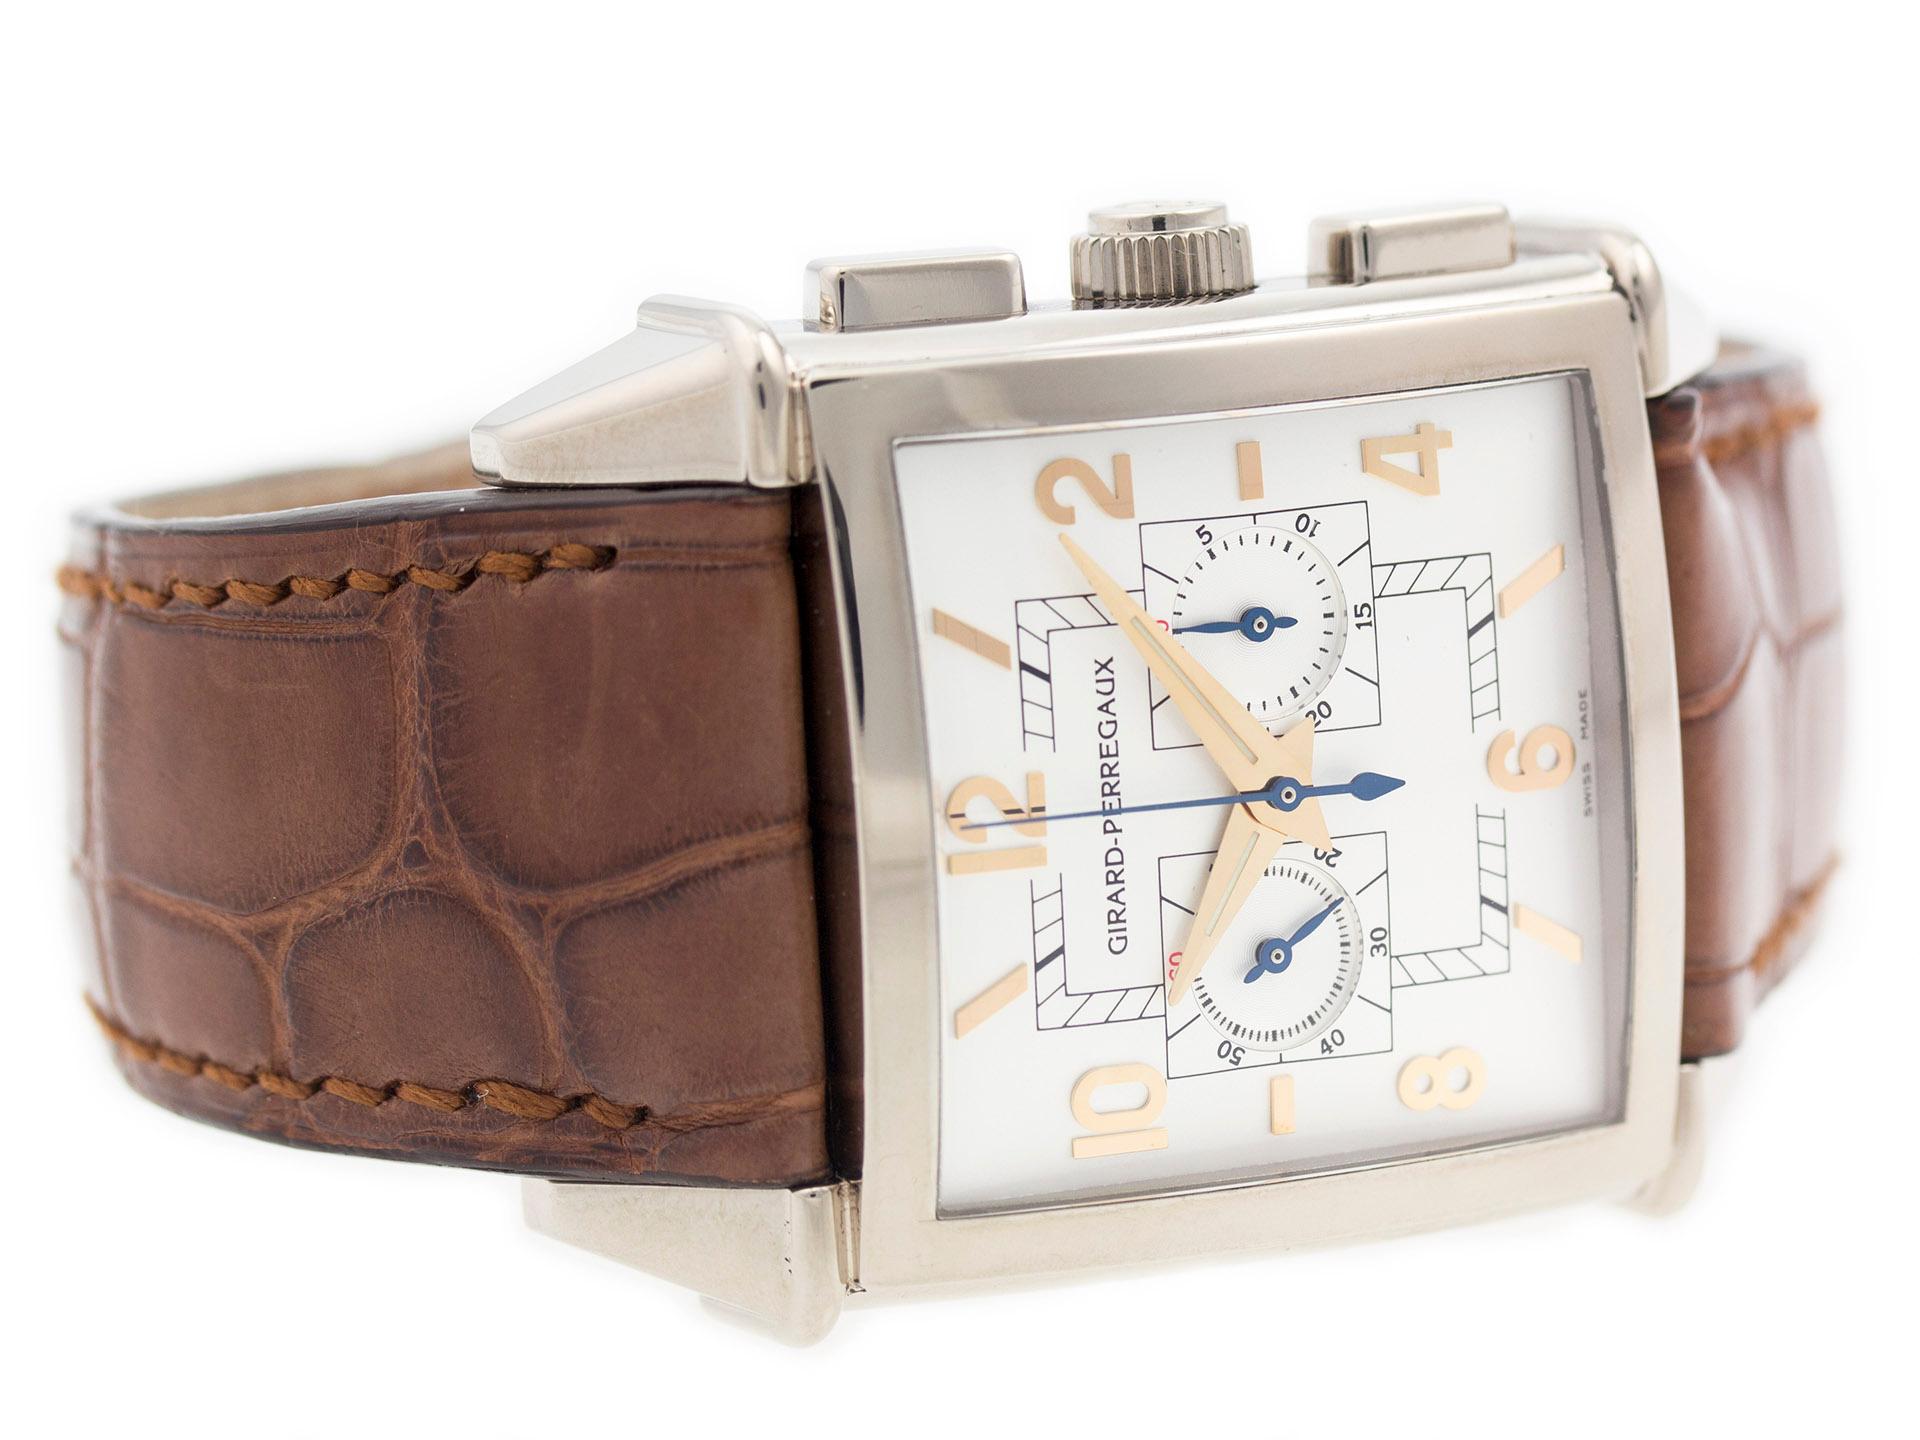 18K White Gold Girard Perregaux Vintage 1945 25820-53-151 watch, water resistance to 30m, with chronograph and leather strap.

Watch	
Brand:	Girard Perregaux
Series:	Vintage 1945
Model #:	25820-53-151
Gender:	Mens
Condition:	Excellent Display Model,